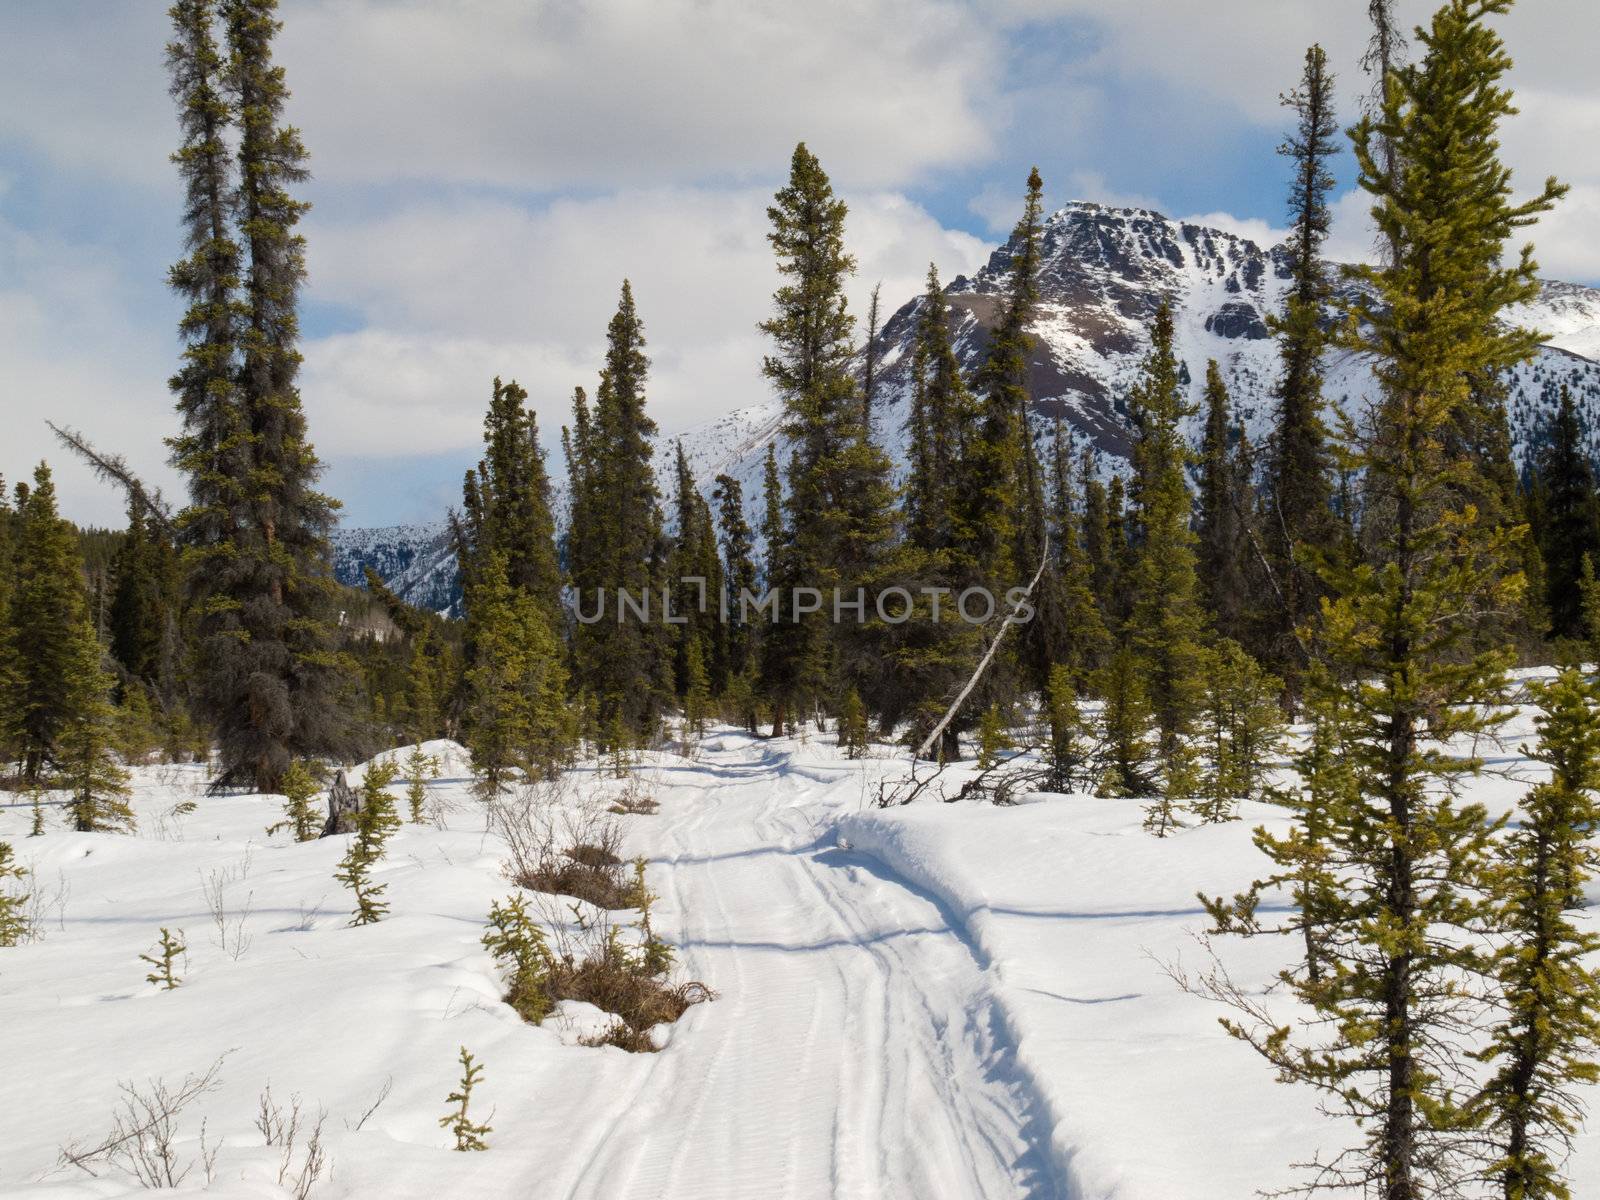 Well used winter trail in boreal forest (taiga) of Yukon Territory, Canada.